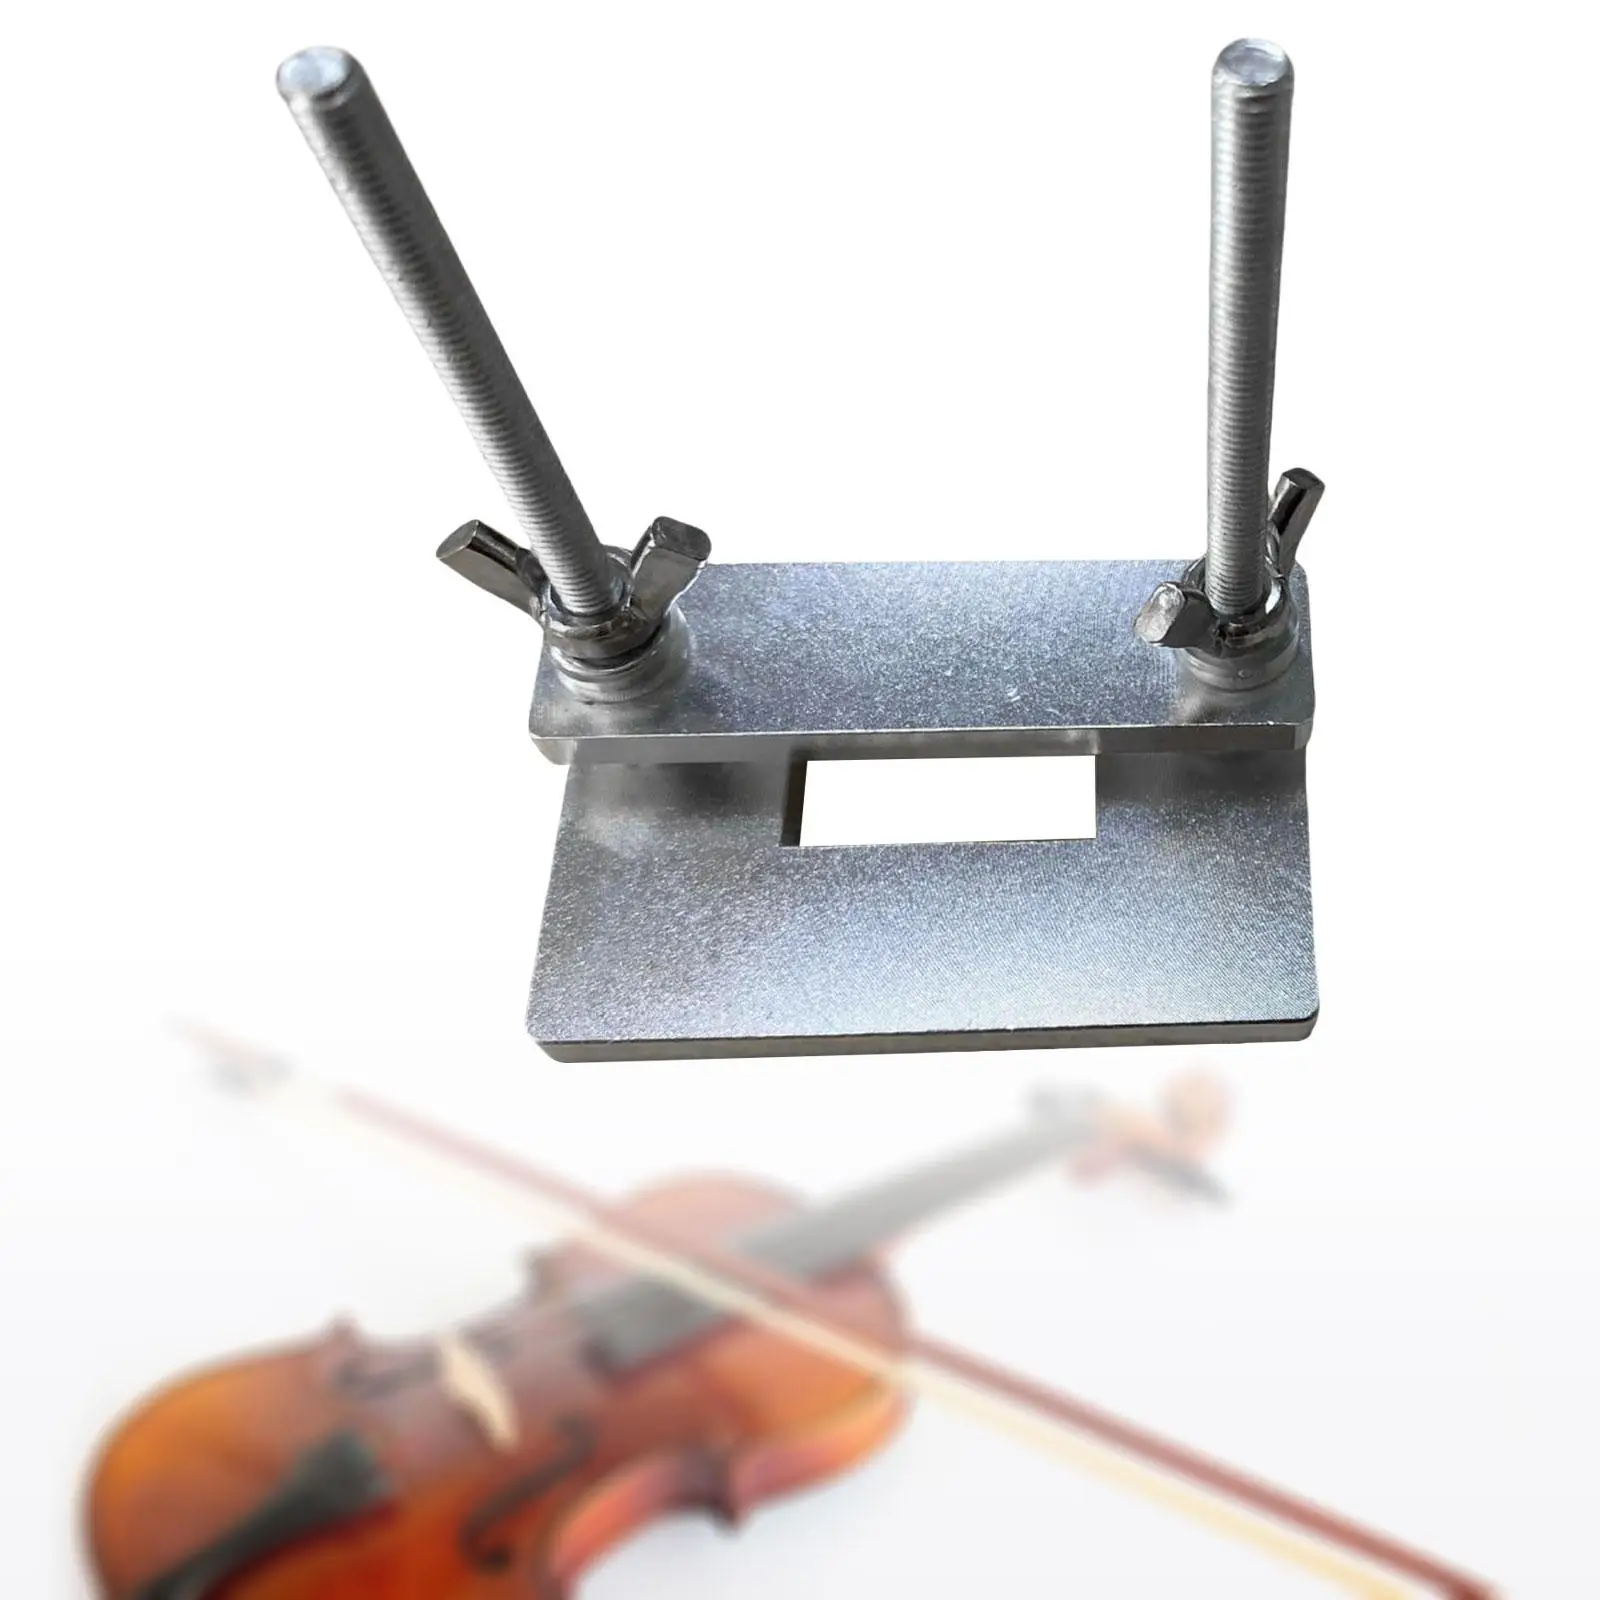 Cello Repair Clamp Adjustable Durable Violin Fixing Clip Luthier Tools for Luthier Violinist Cello Violin Maker Fix Tool